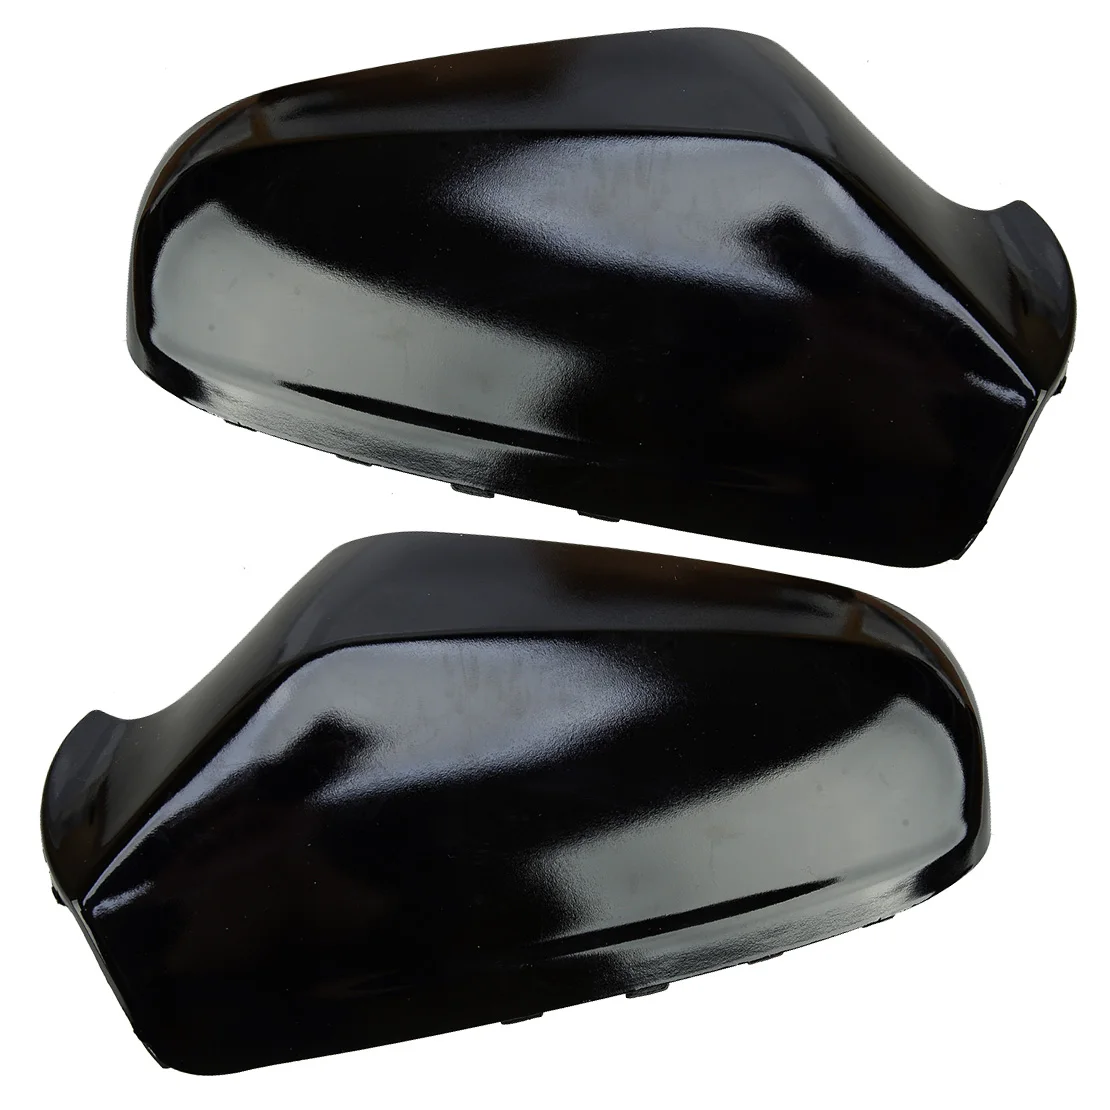 

6428925 6428199 6428918 Front Left & Right Rearview Mirror Cover Cap Casing 6428200 6428917 Fit For Opel Vauxhall Saturn Astra